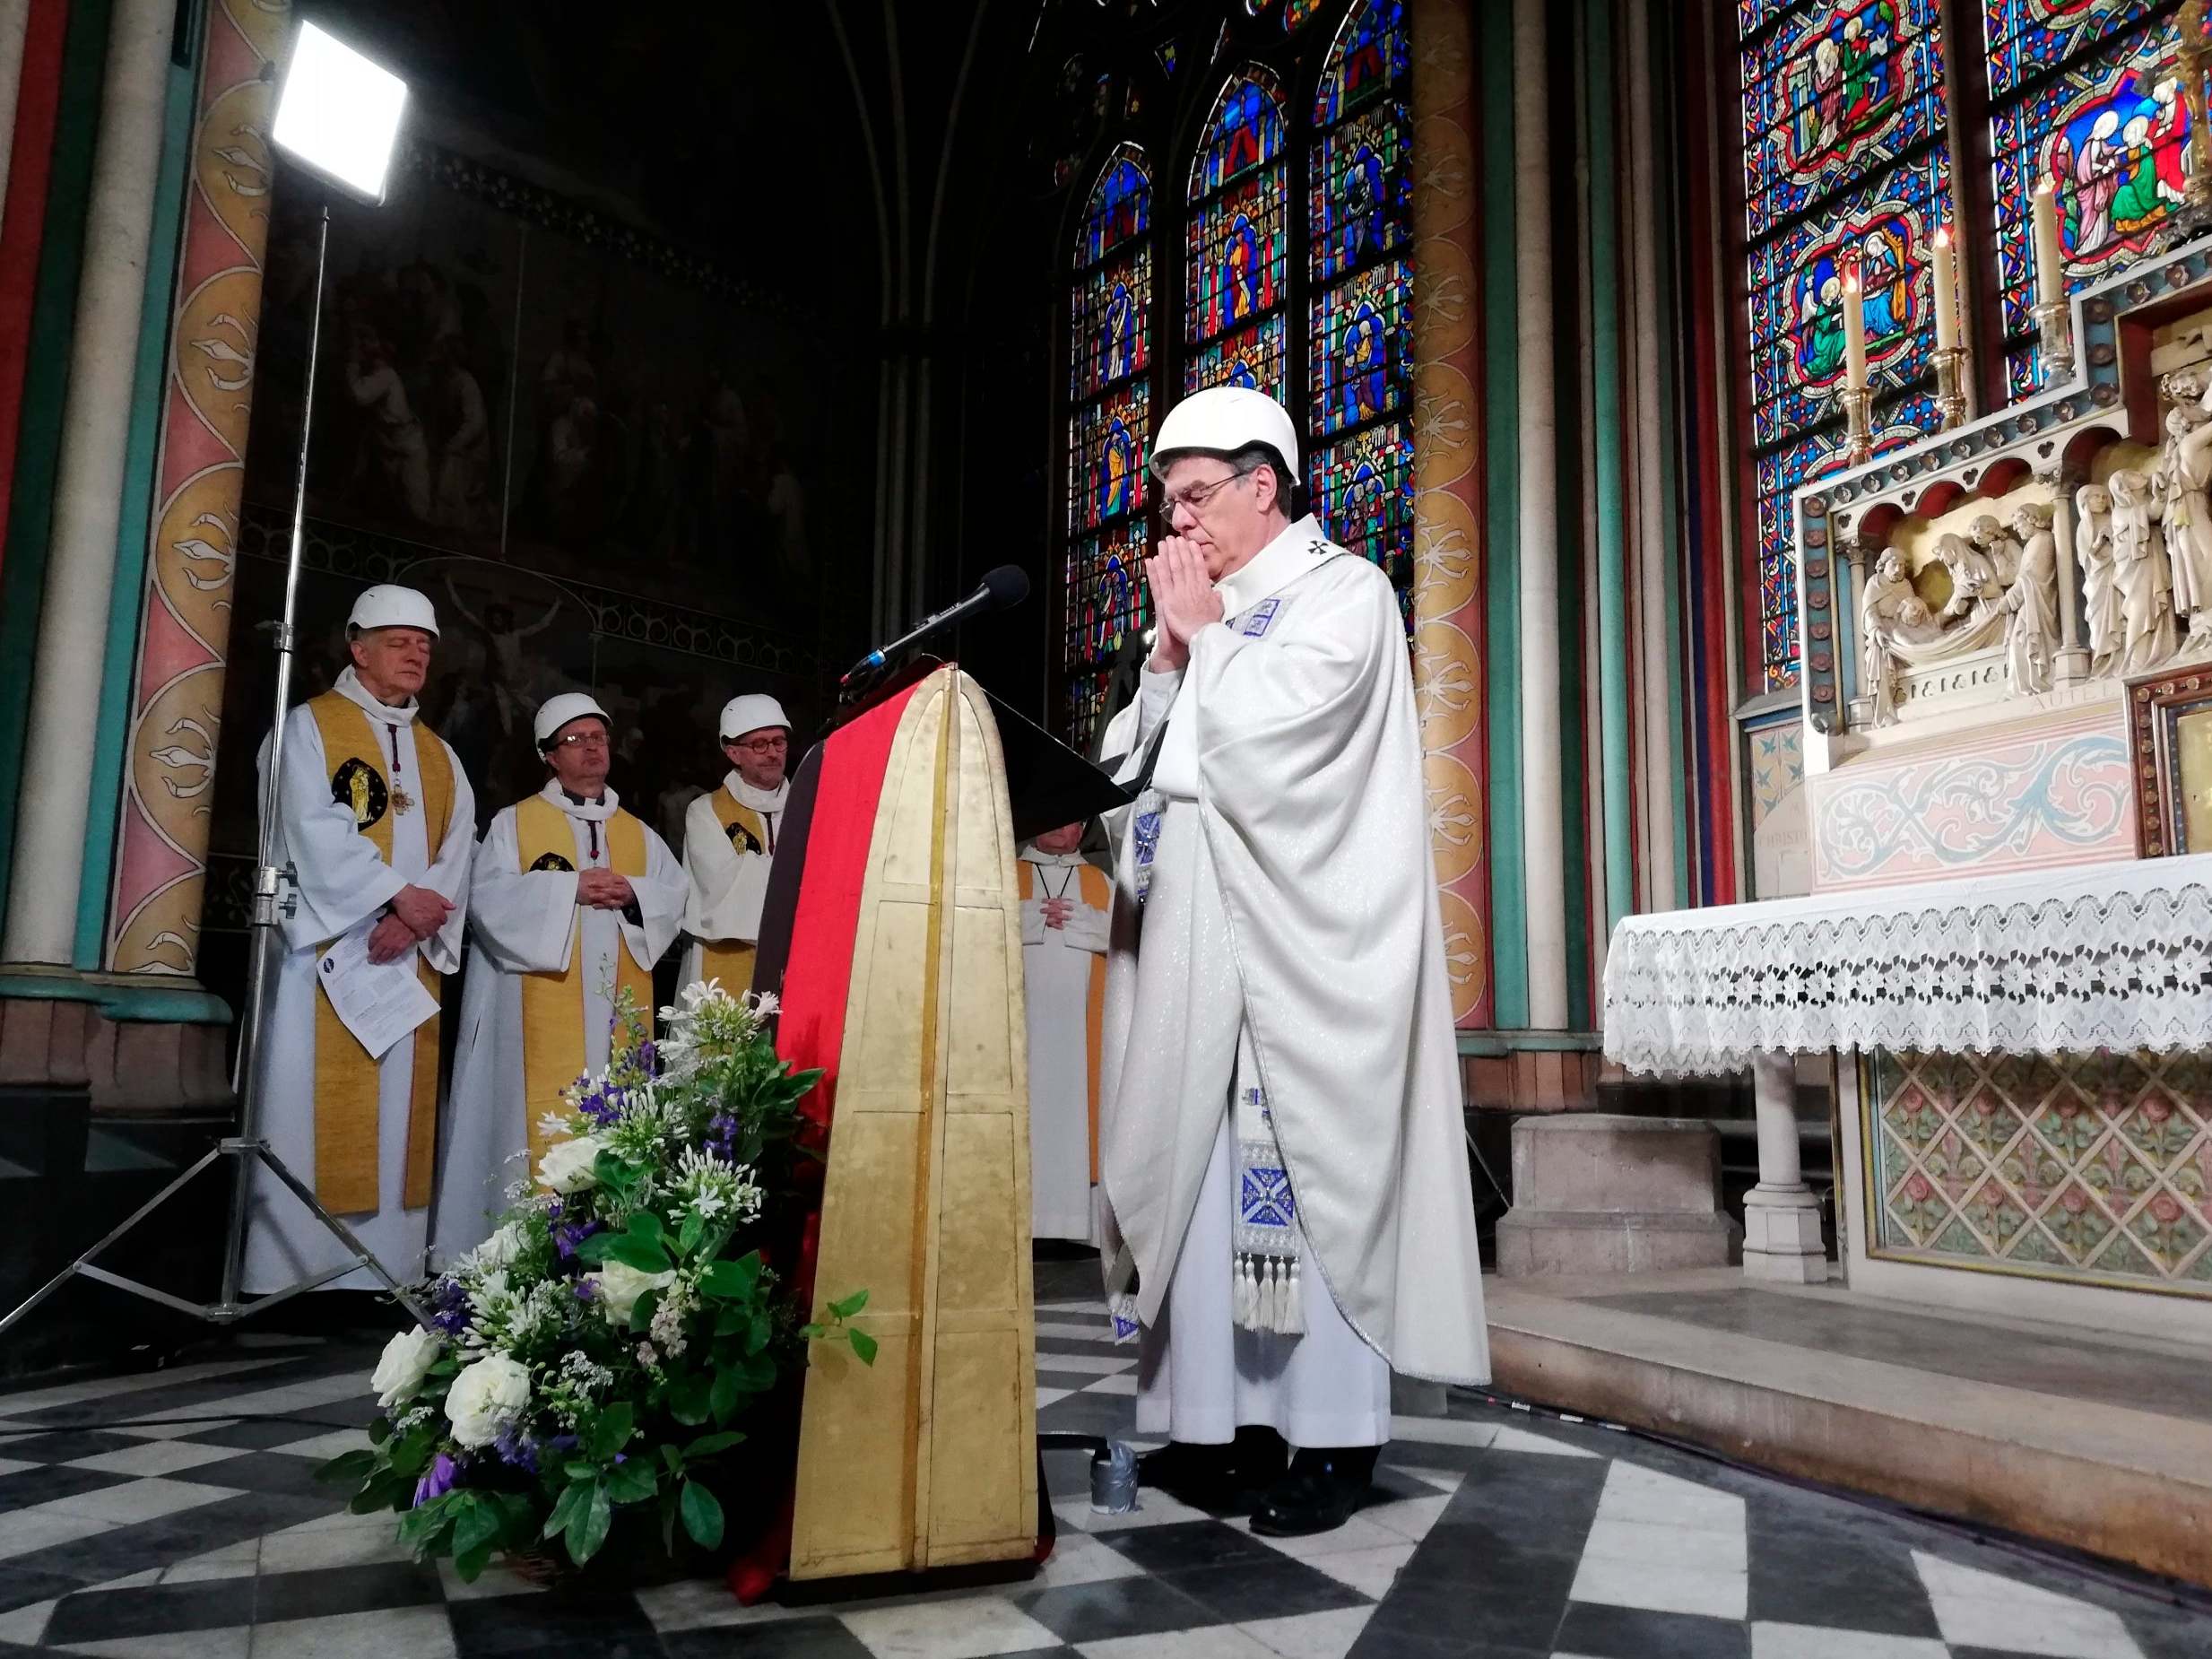 Notre Dame hosts first mass since devastating fire as billionaires' offers of cash fail to materialise